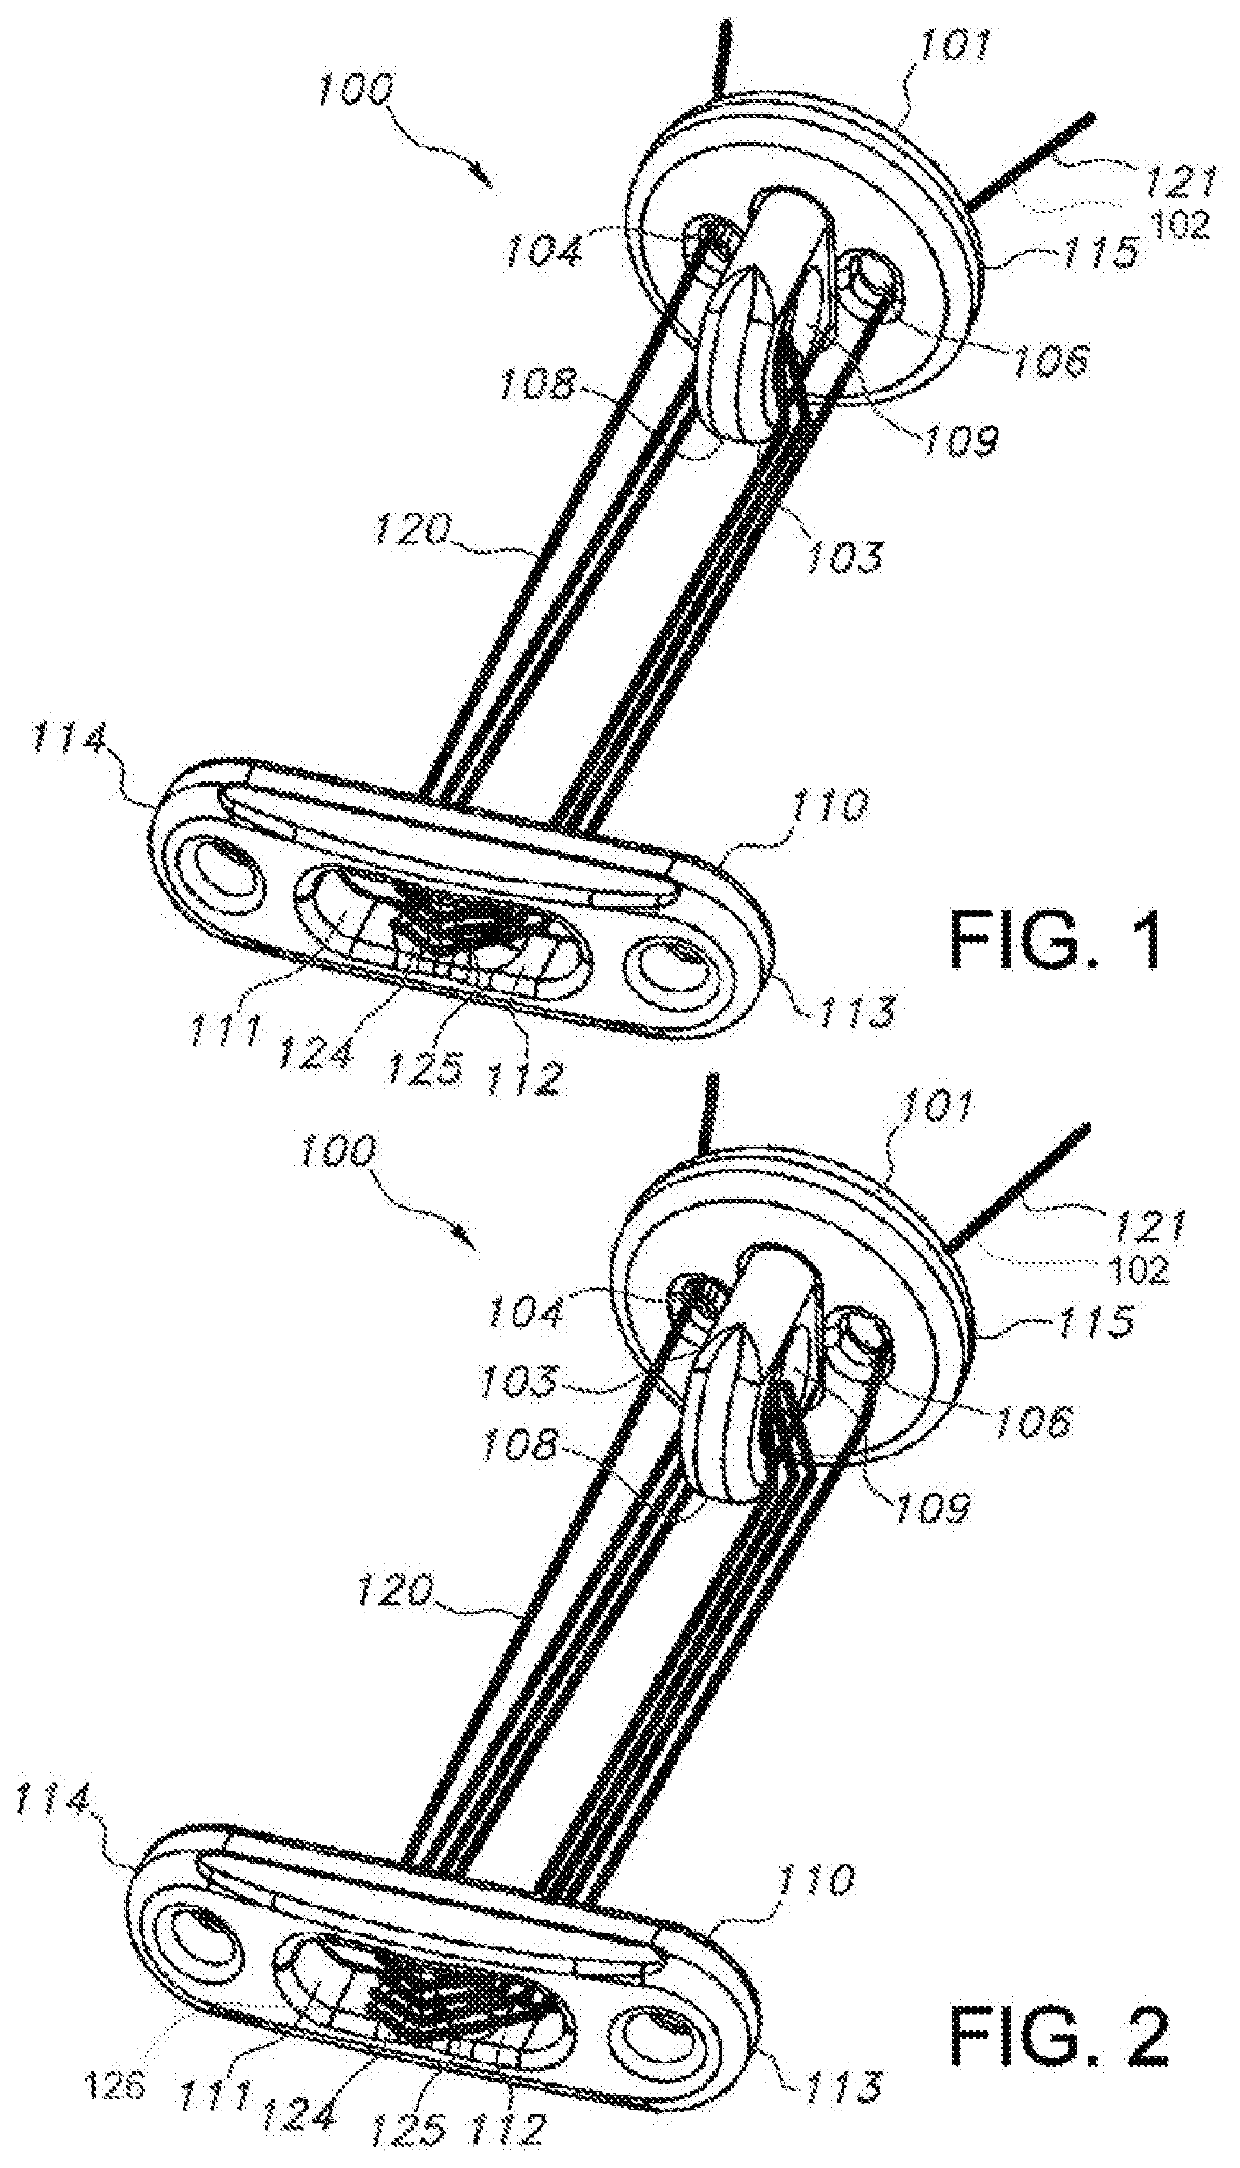 Knotless orthopedic stabilization system